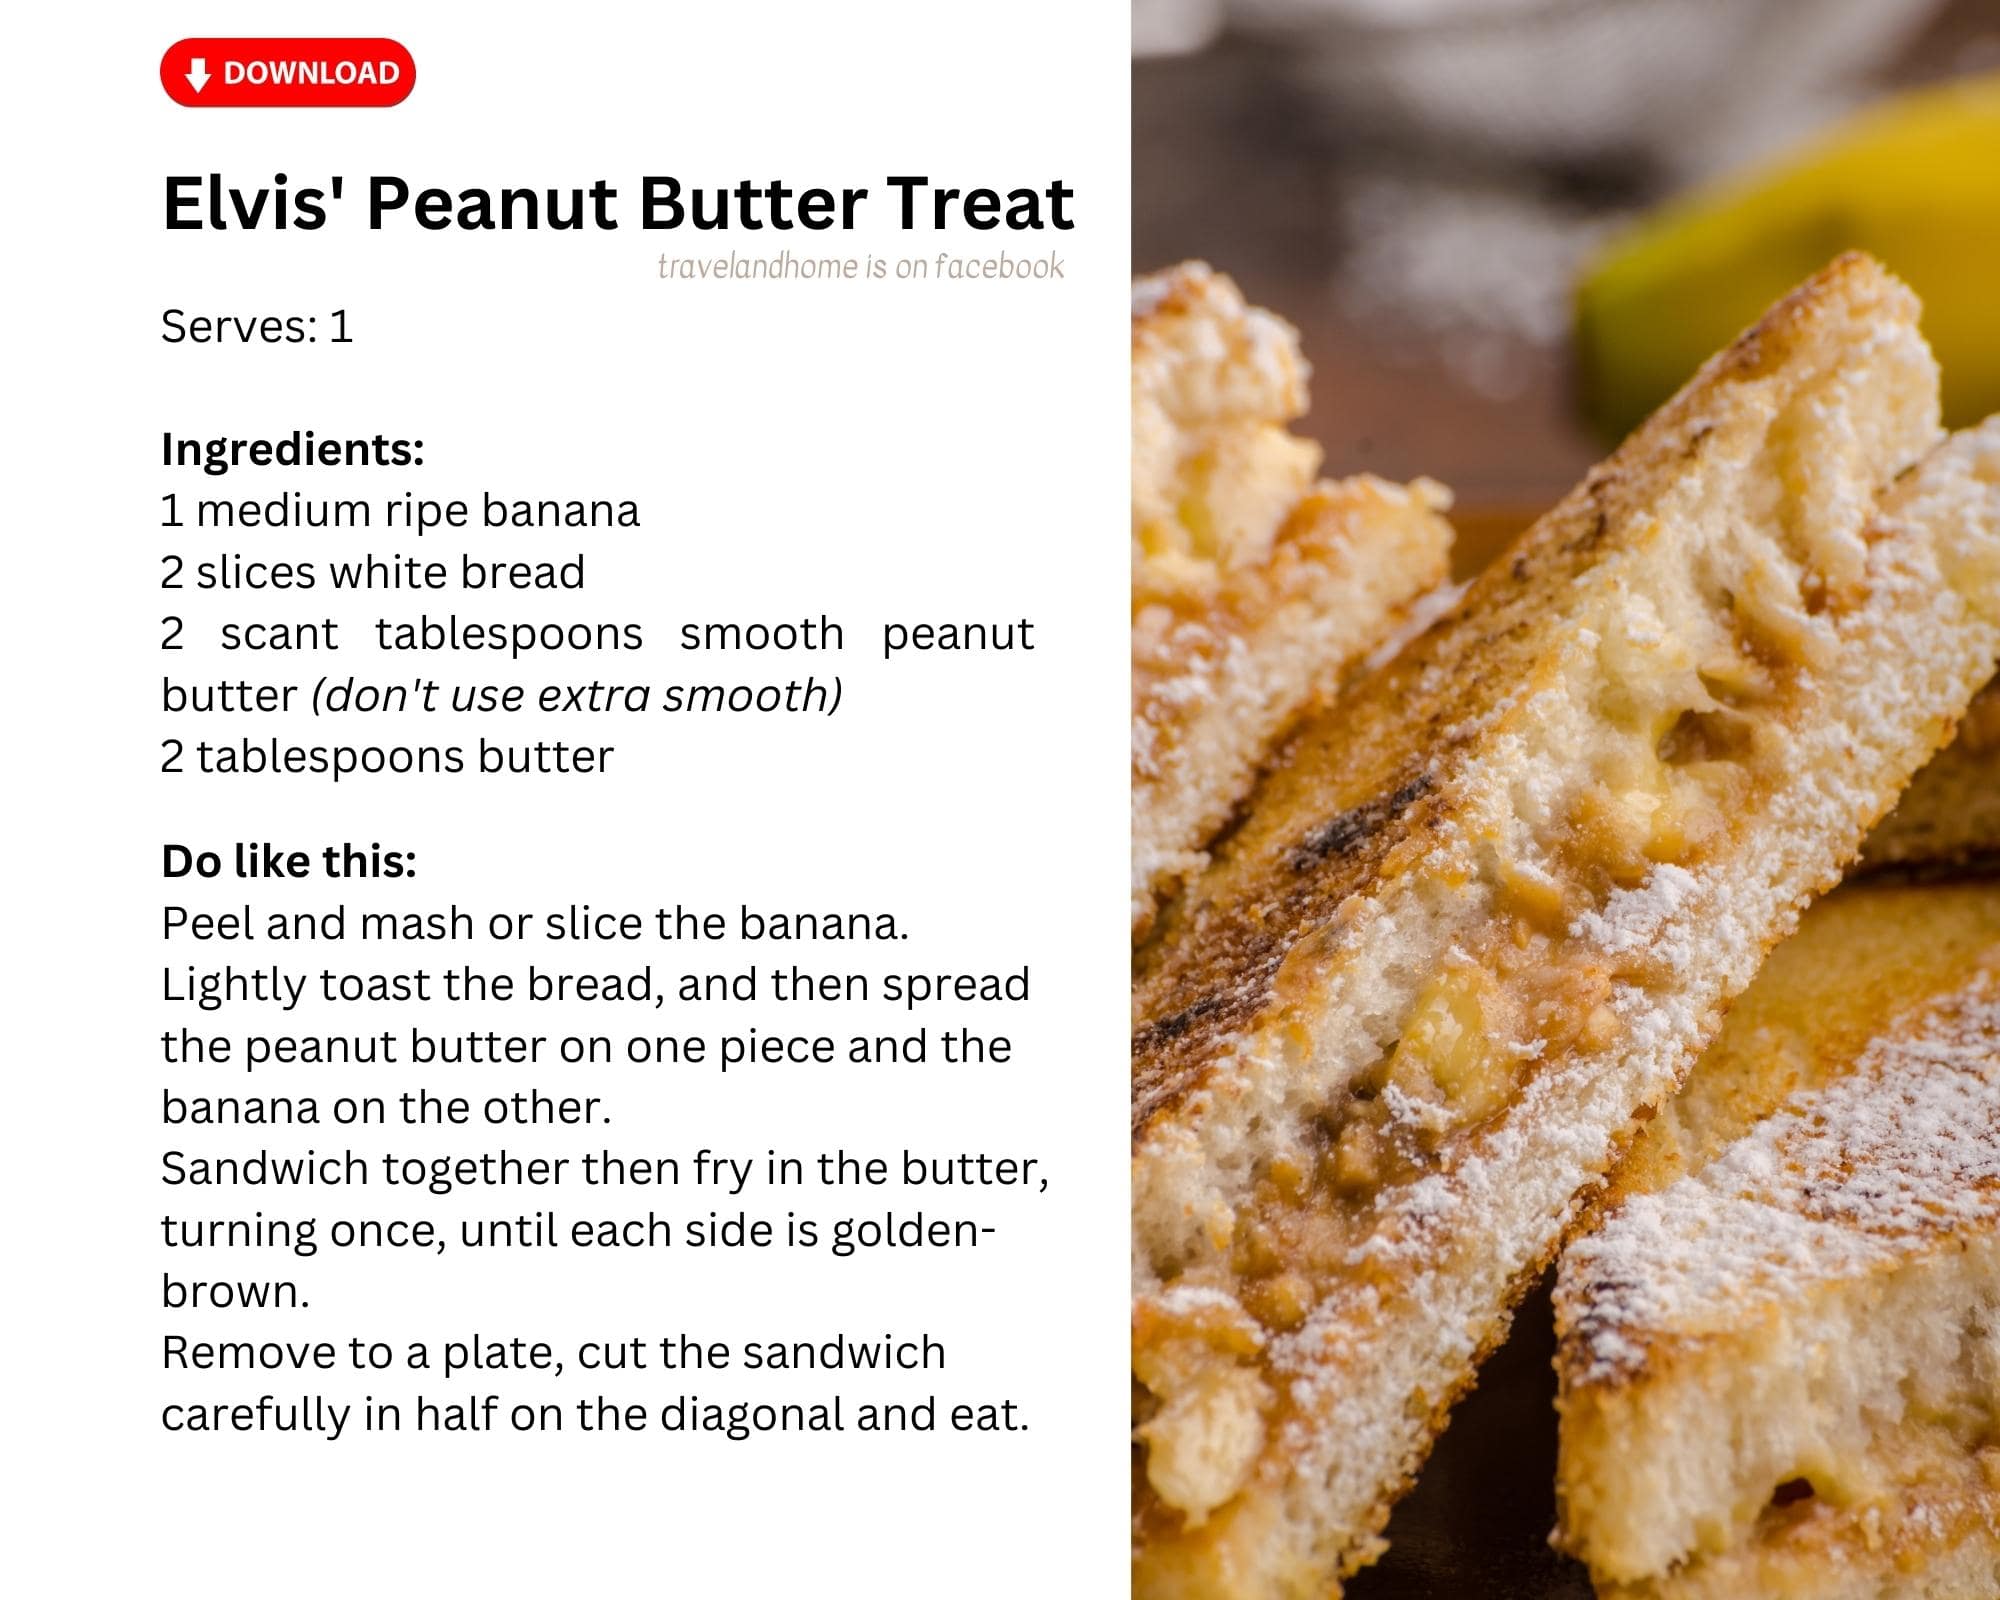 Quick and easy recipe for one Elvis favorite food peanut butter sandwich min